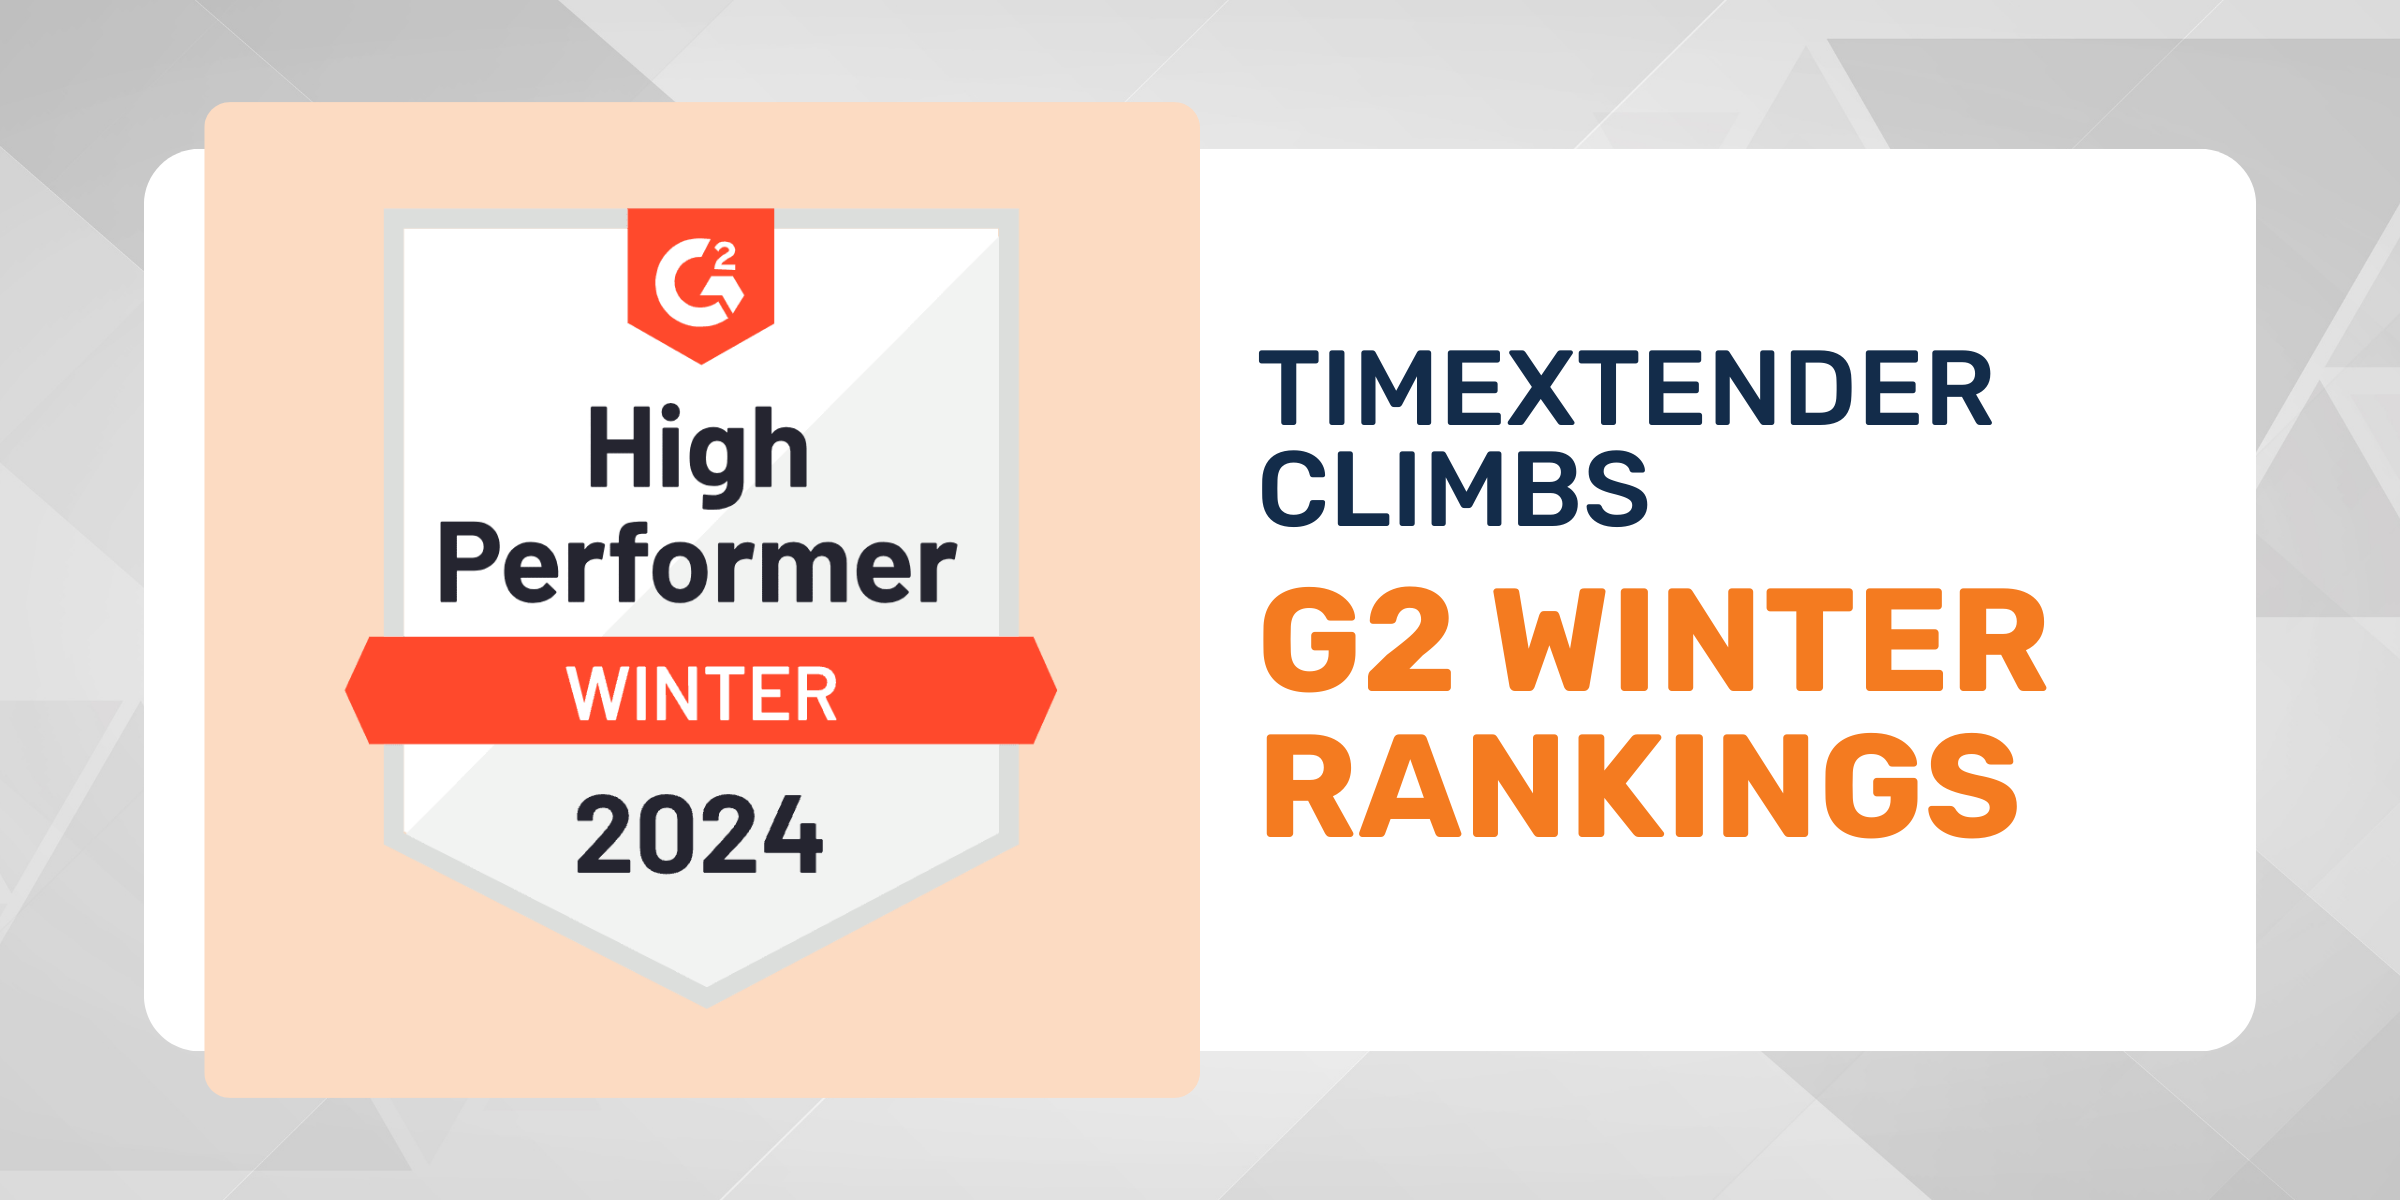 Timextender Keeps Climbing With New G2 Winter Honors